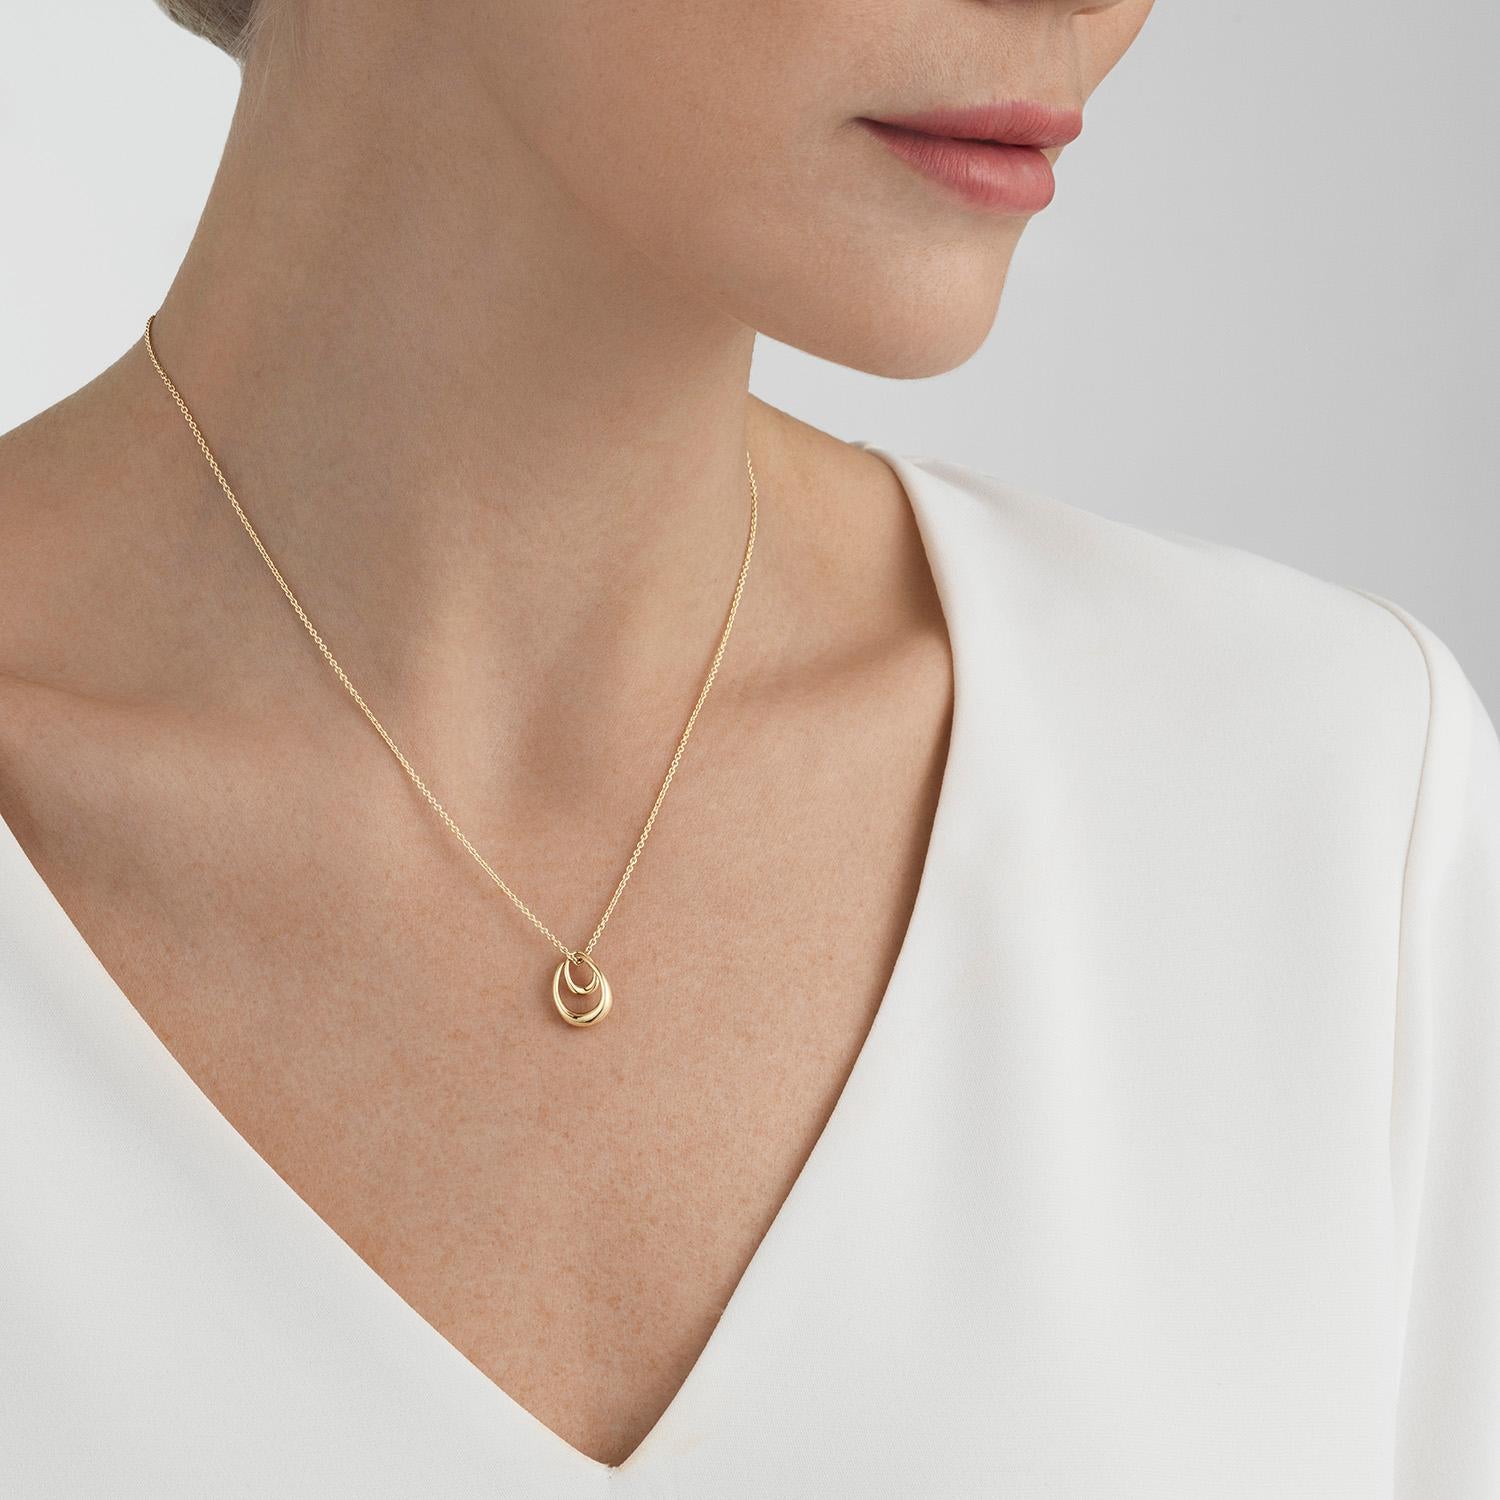 Celebrate the unbreakable bond between mother and child with the Offspring pendant.

Two delicate egg shapes are interlocked, the small one protected by the big one, symbolising the emotional and unique connection between a mother and her